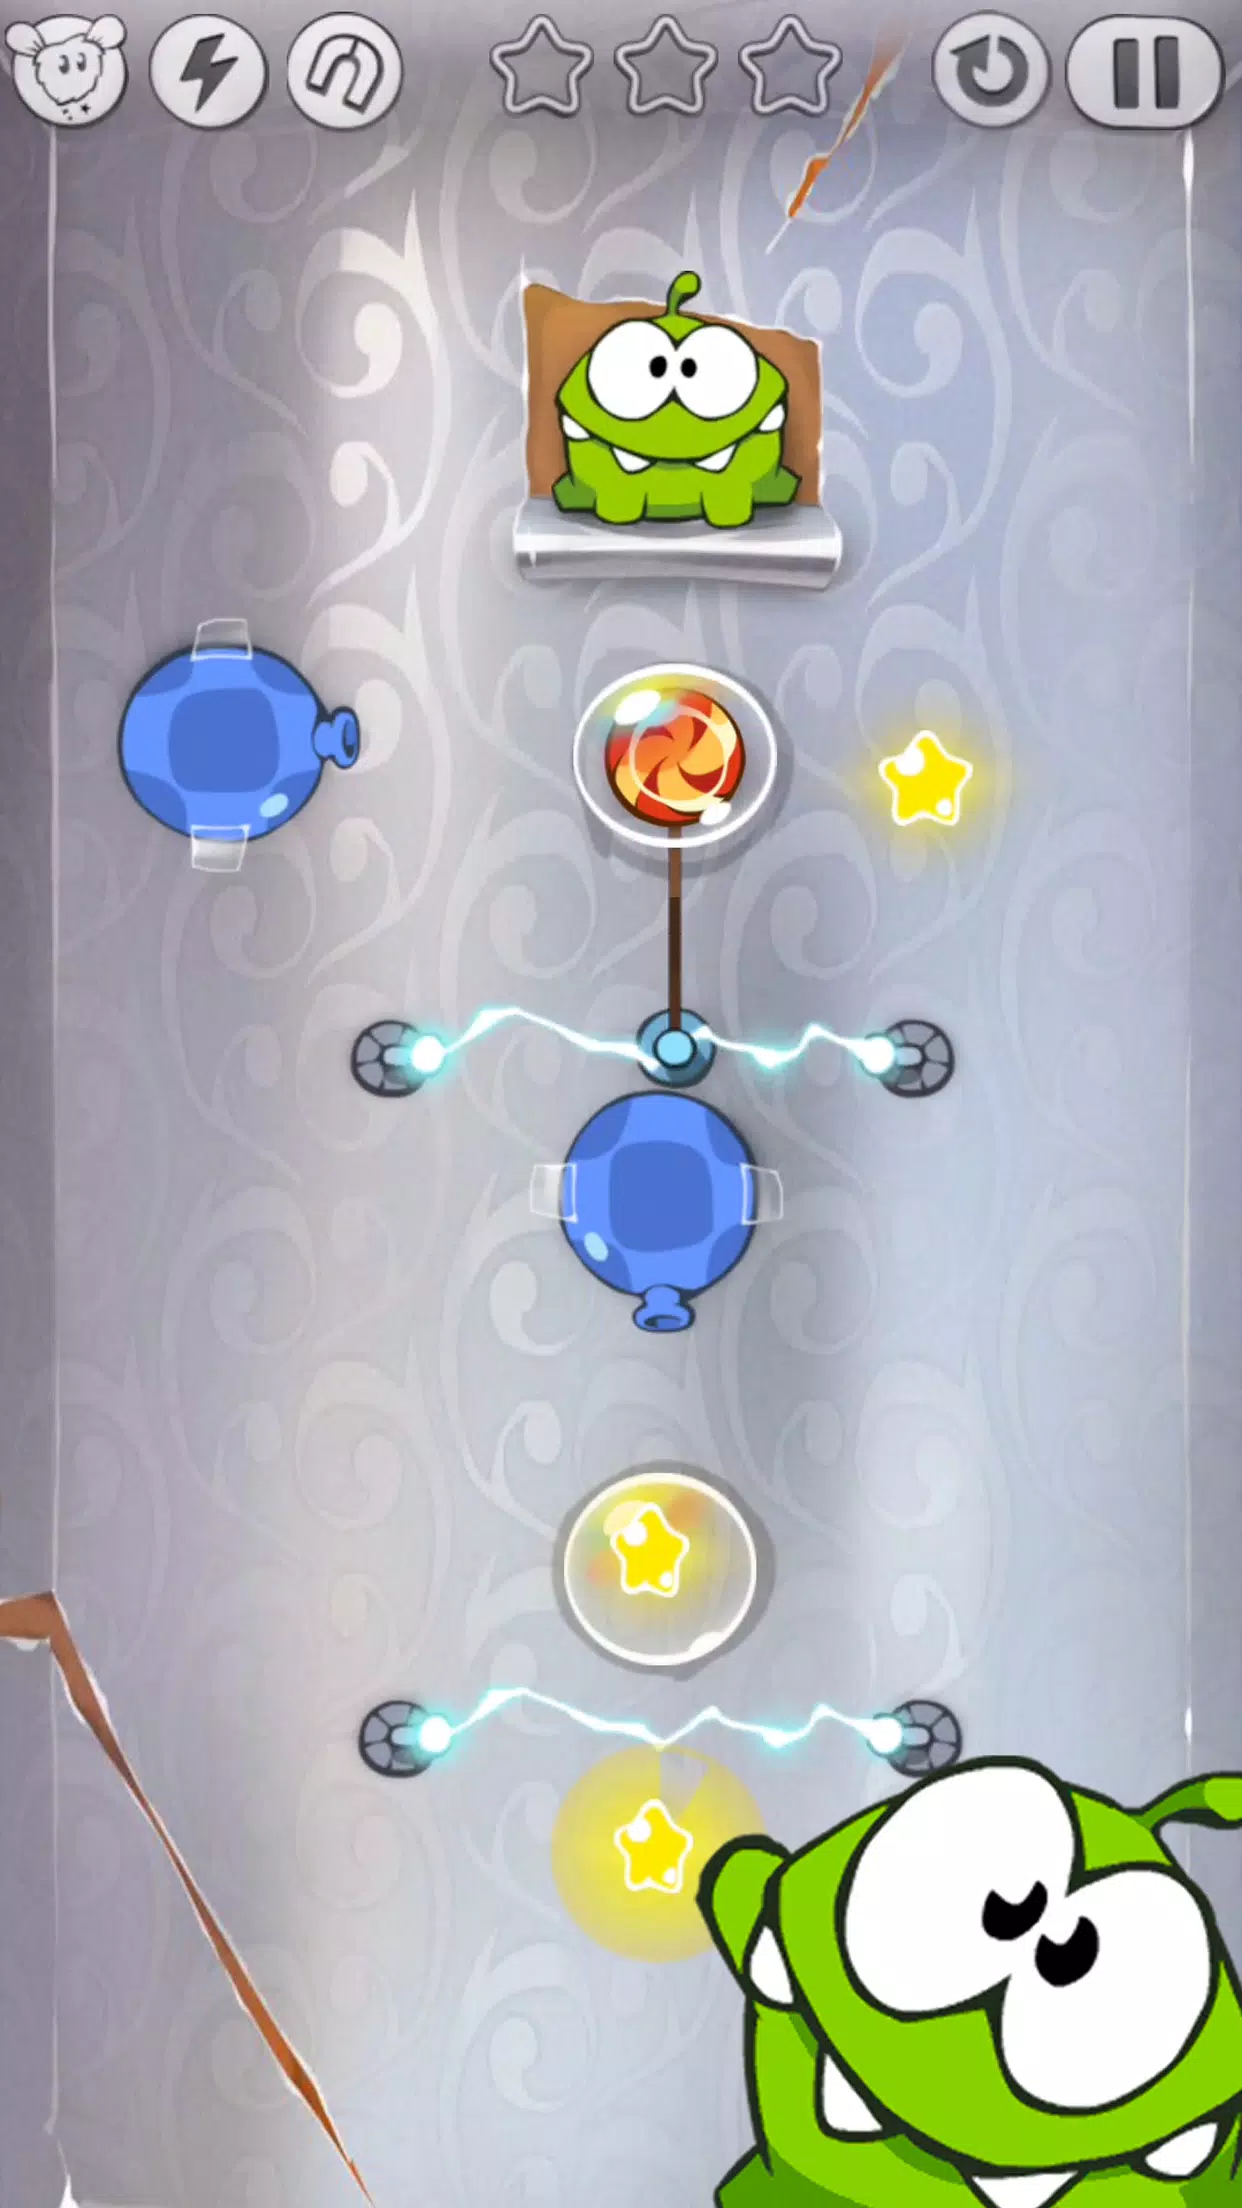 Download Cut the Rope Daily APKs for Android - APKMirror